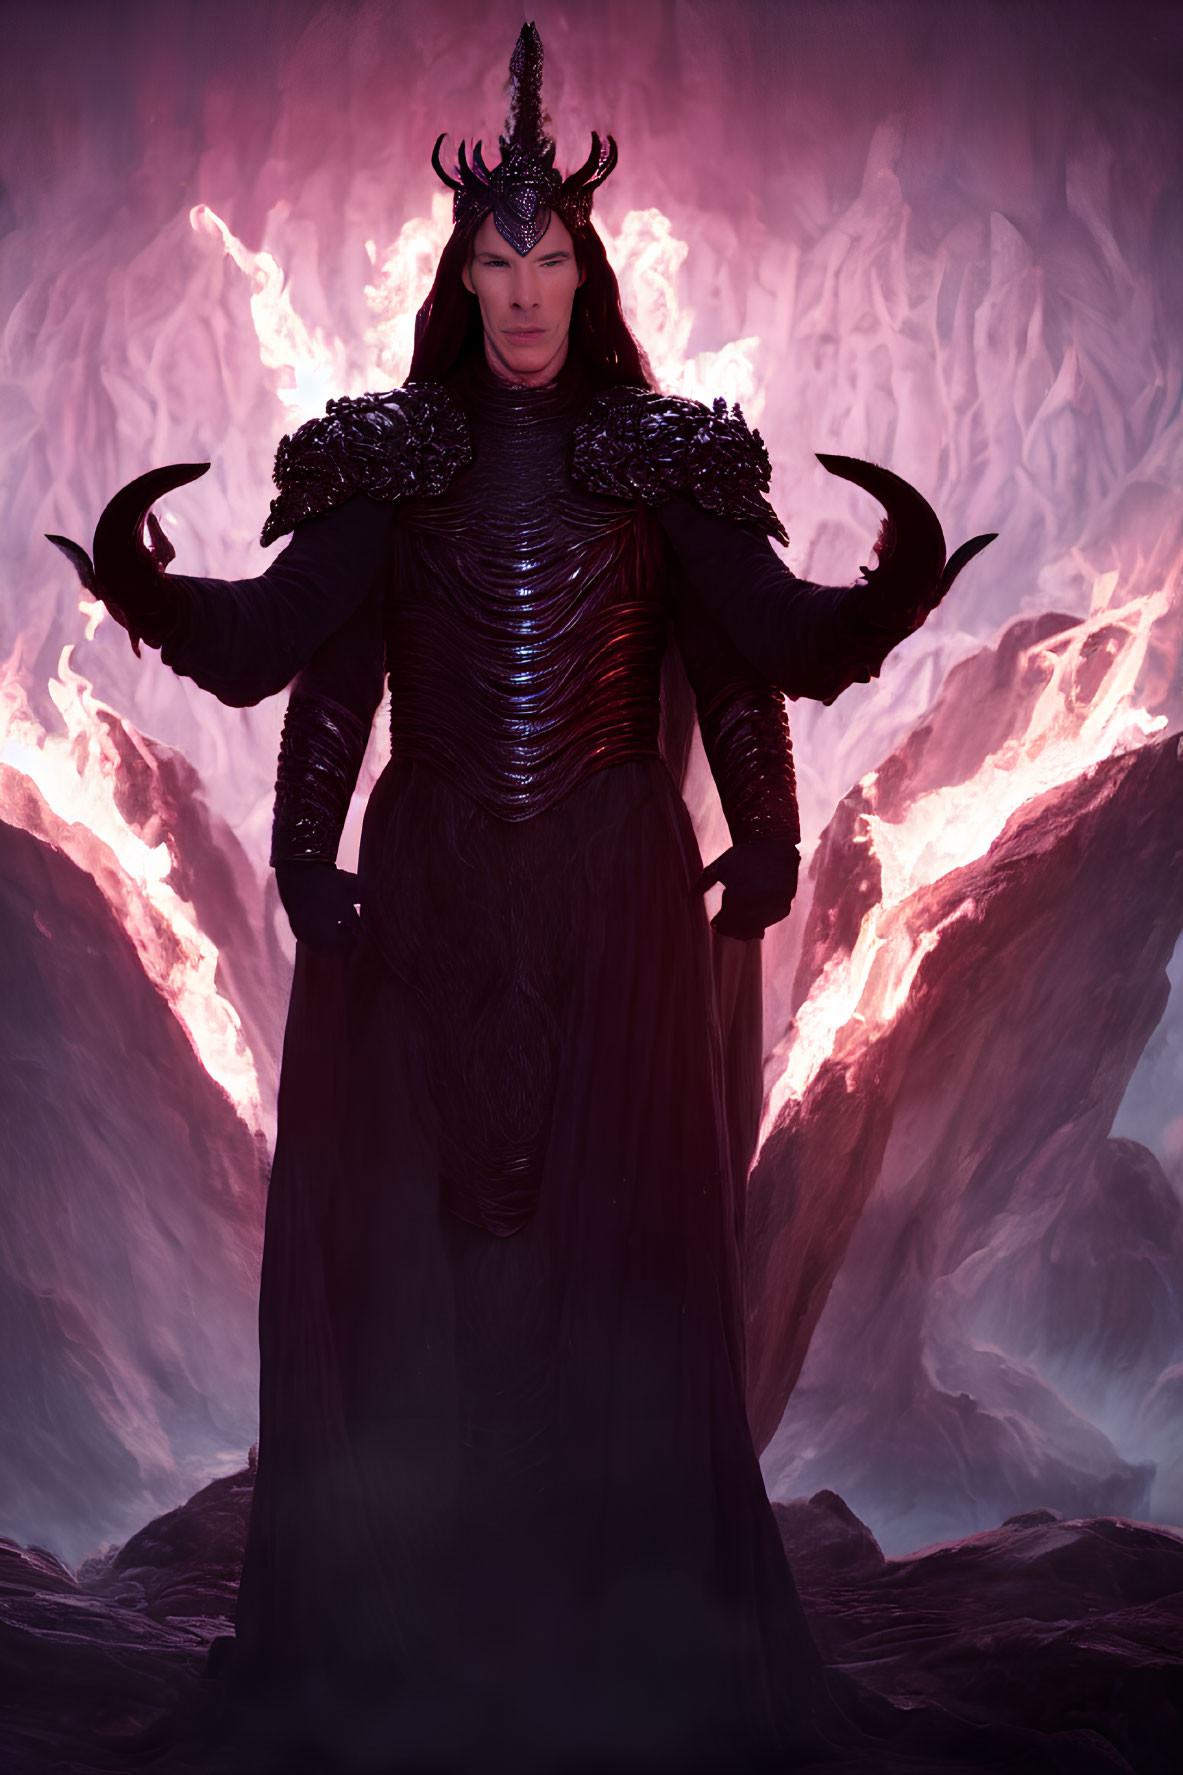 Elaborate dark fantasy armor with horns against red crystal background